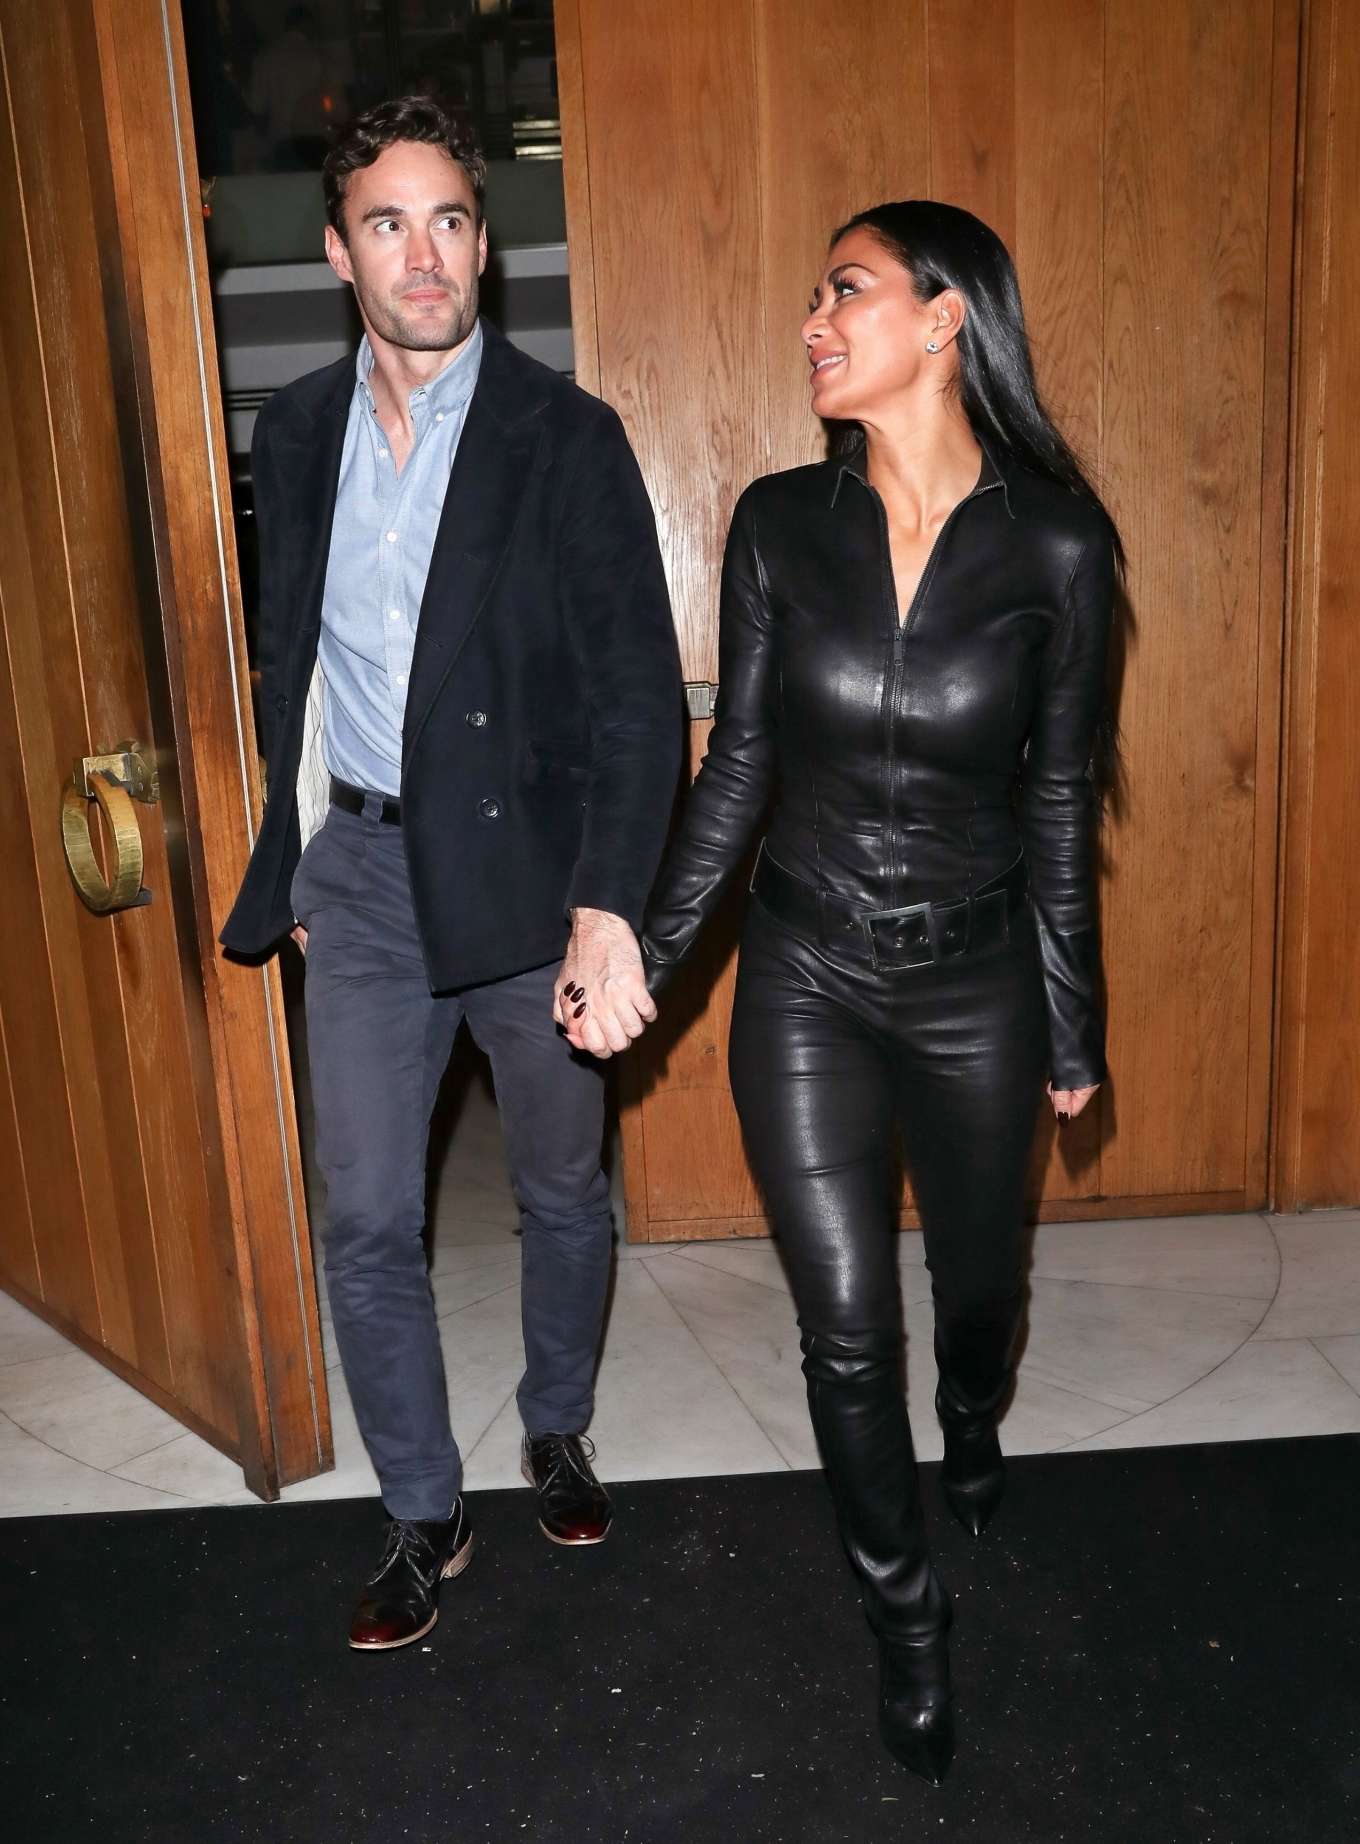 Nicole Scherzinger 2020 : Nicole Scherzinger in Leather Catsuit with Thom Evans – Out in London-09